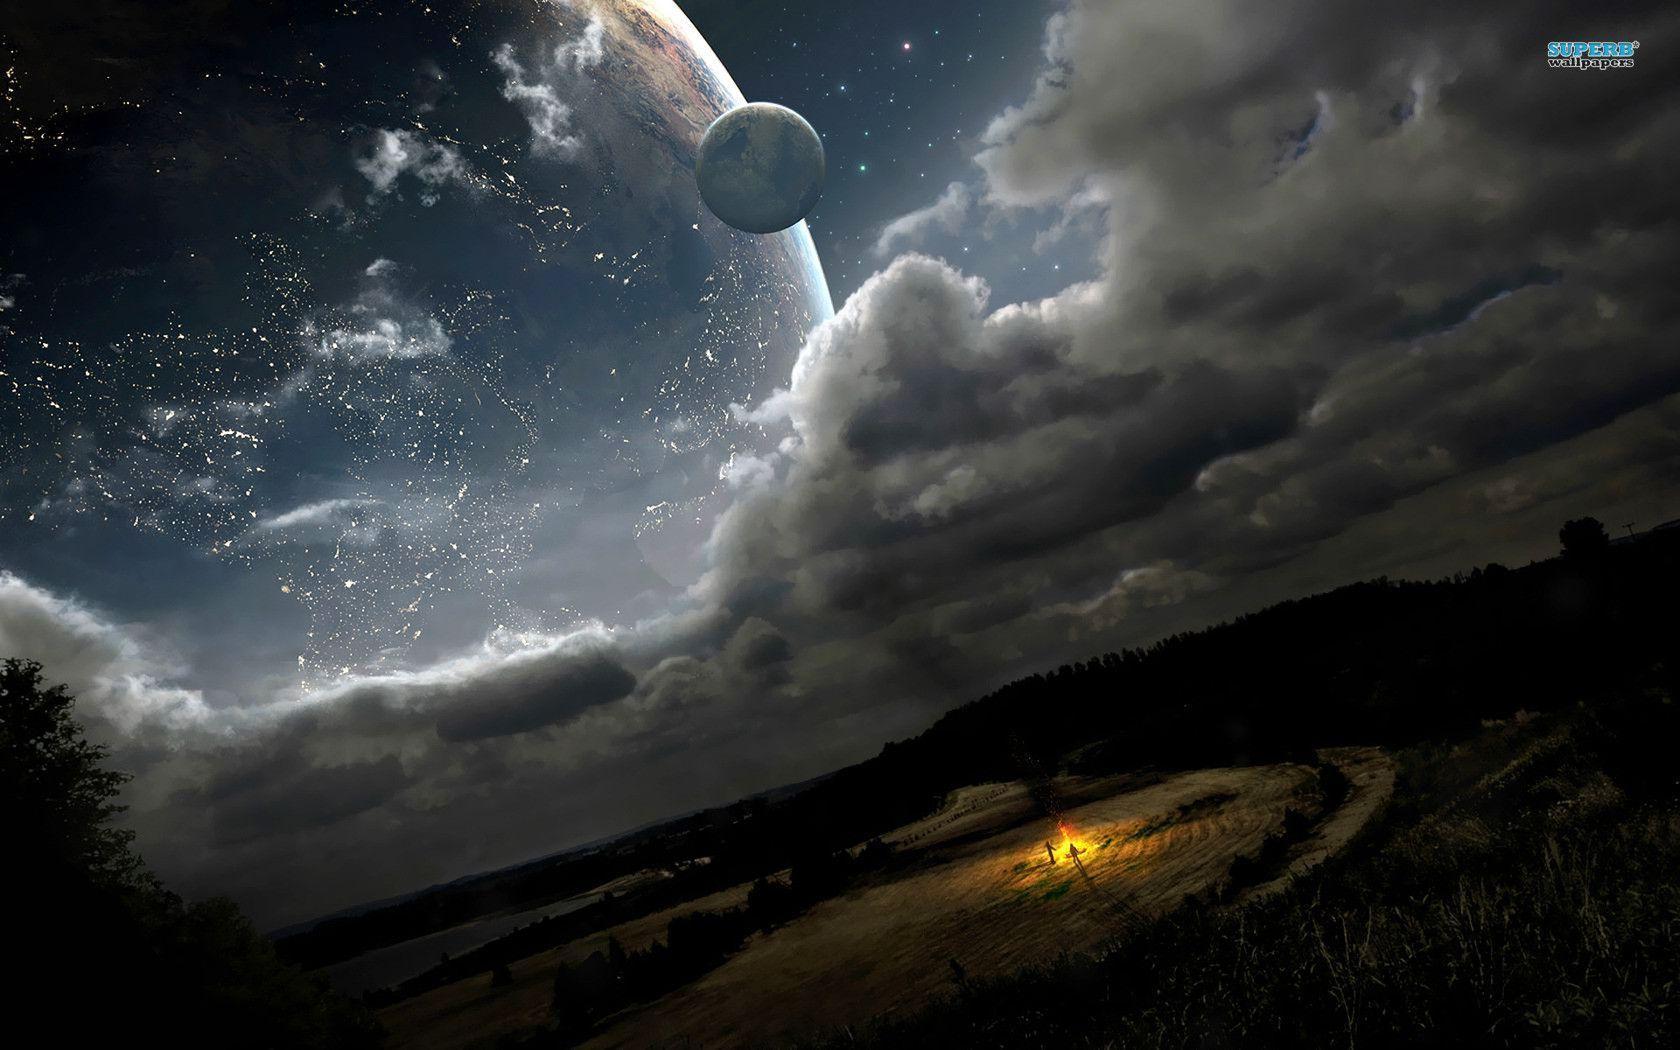 Night Sky Backgrounds Wallpaper Cave